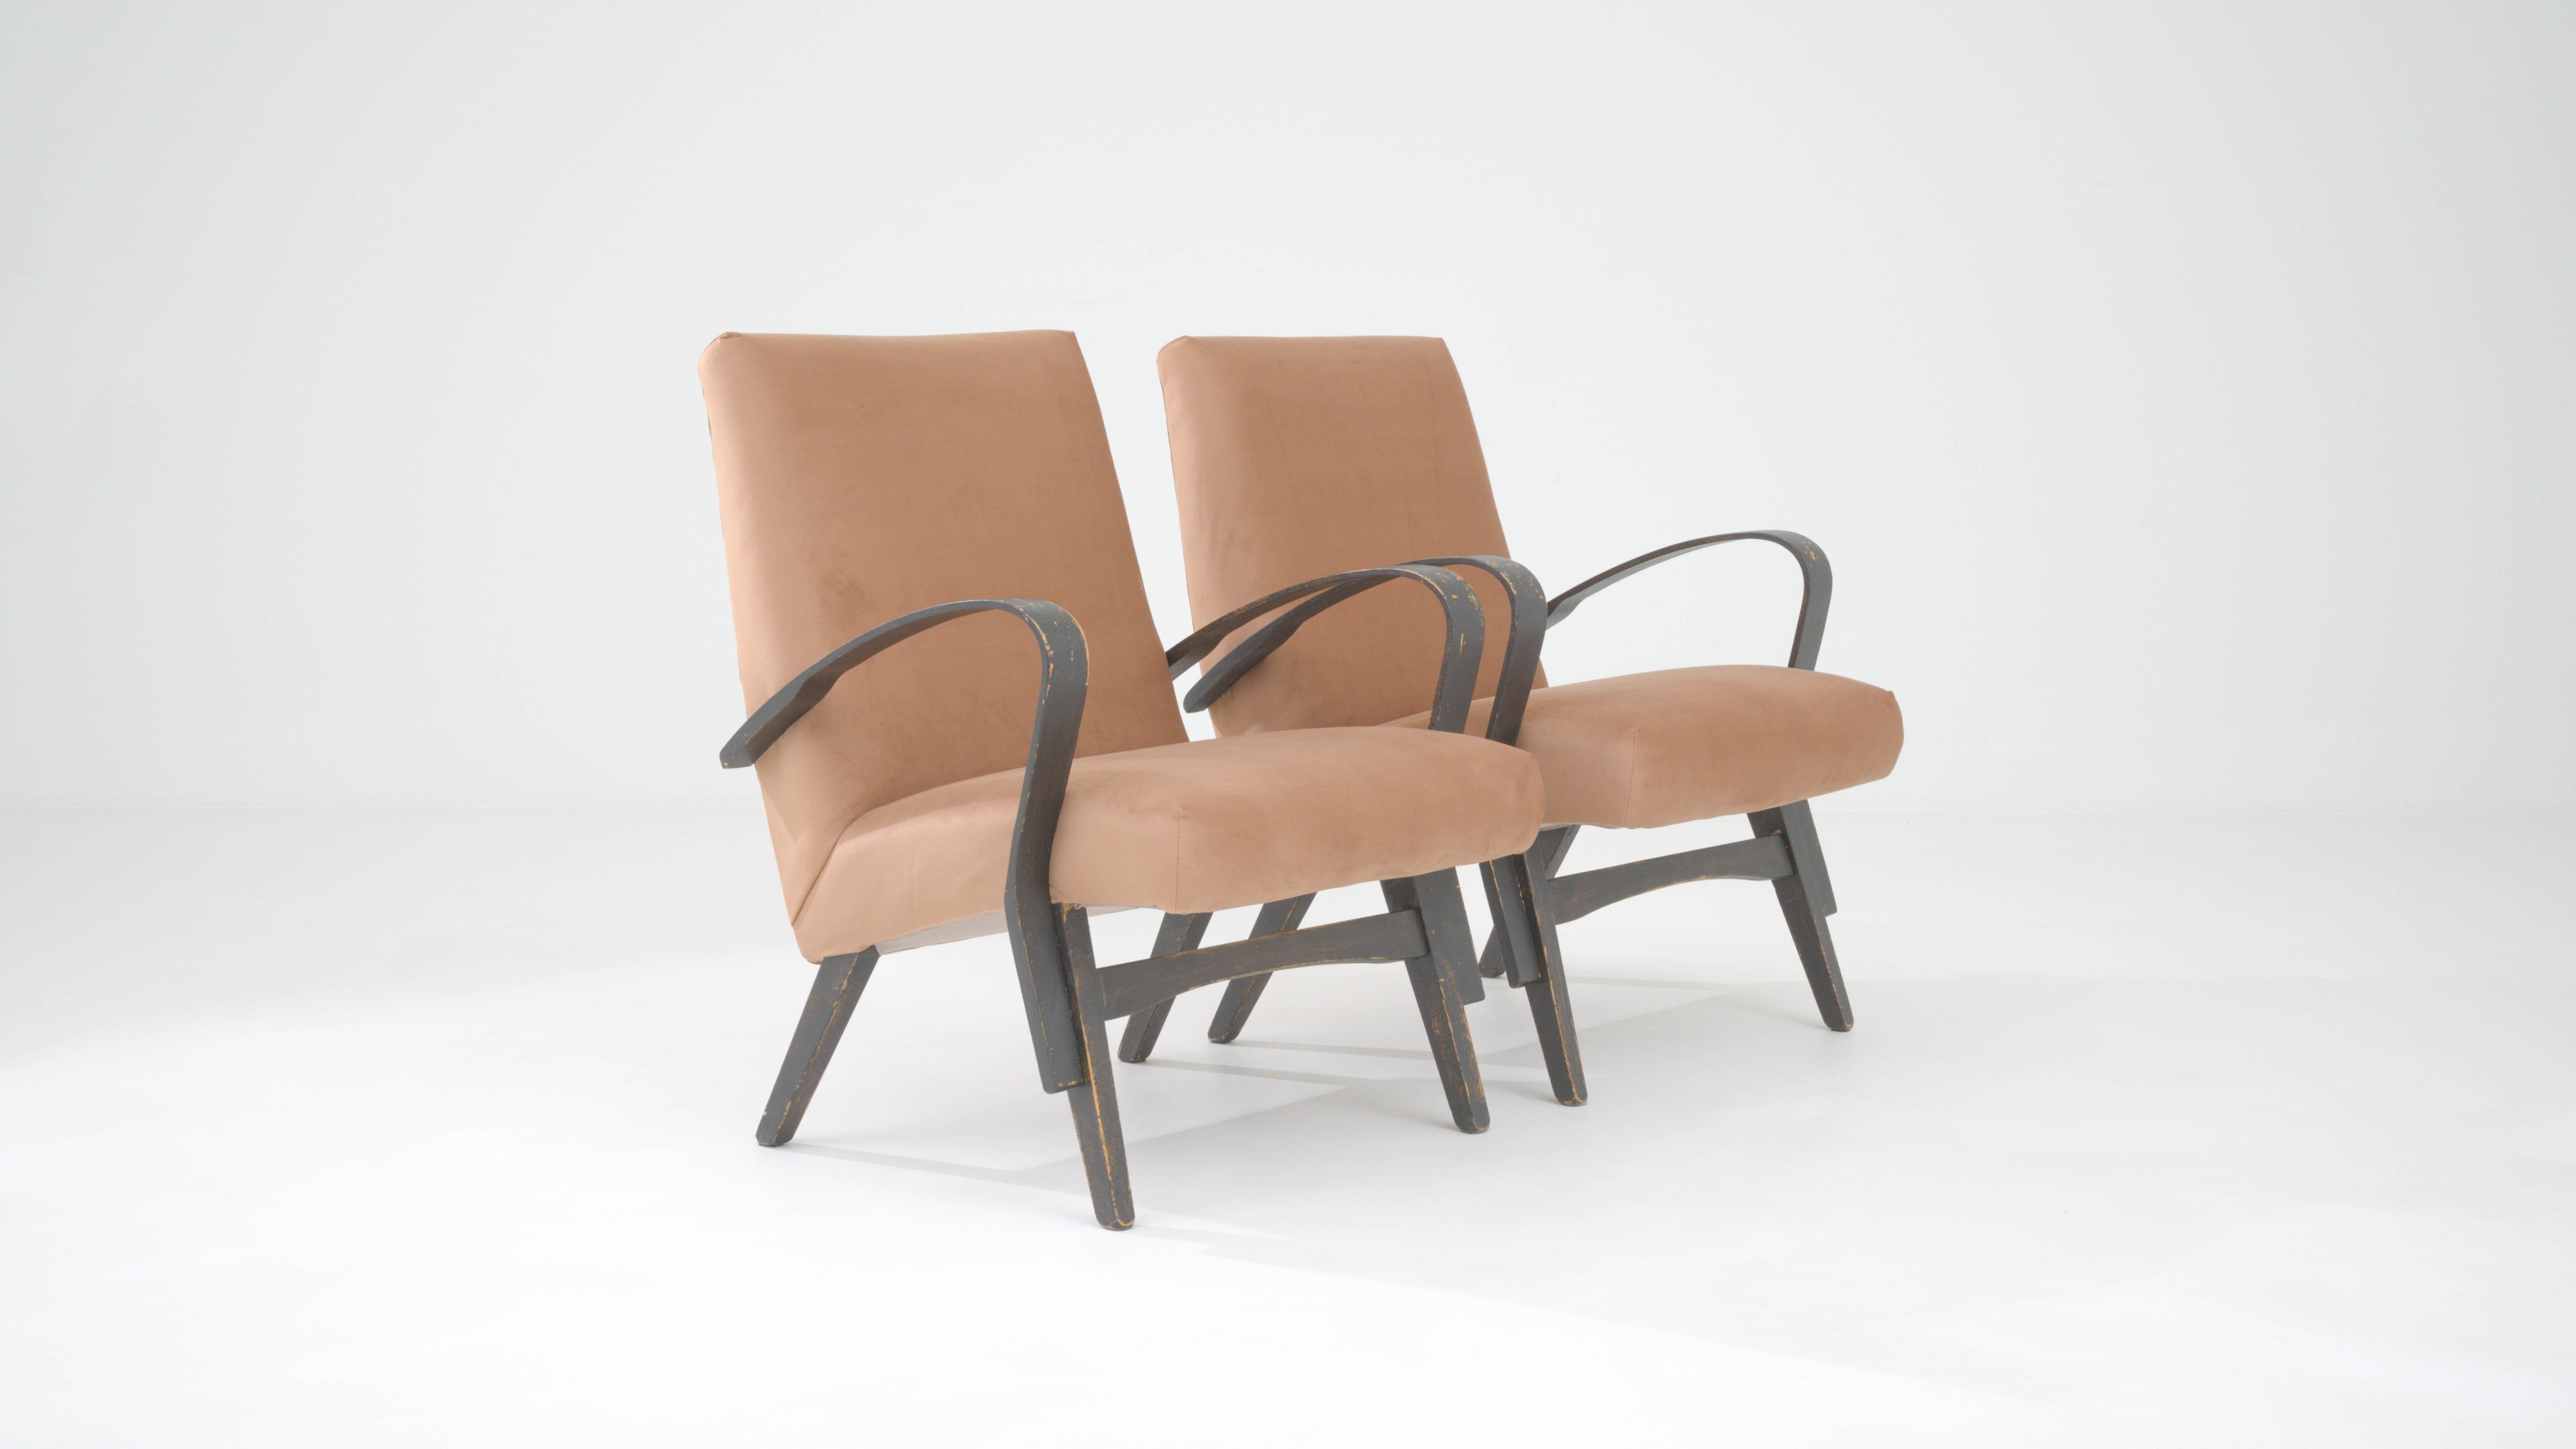 1960s Czech Upholstered Armchairs By Tatra, a Pair For Sale 5